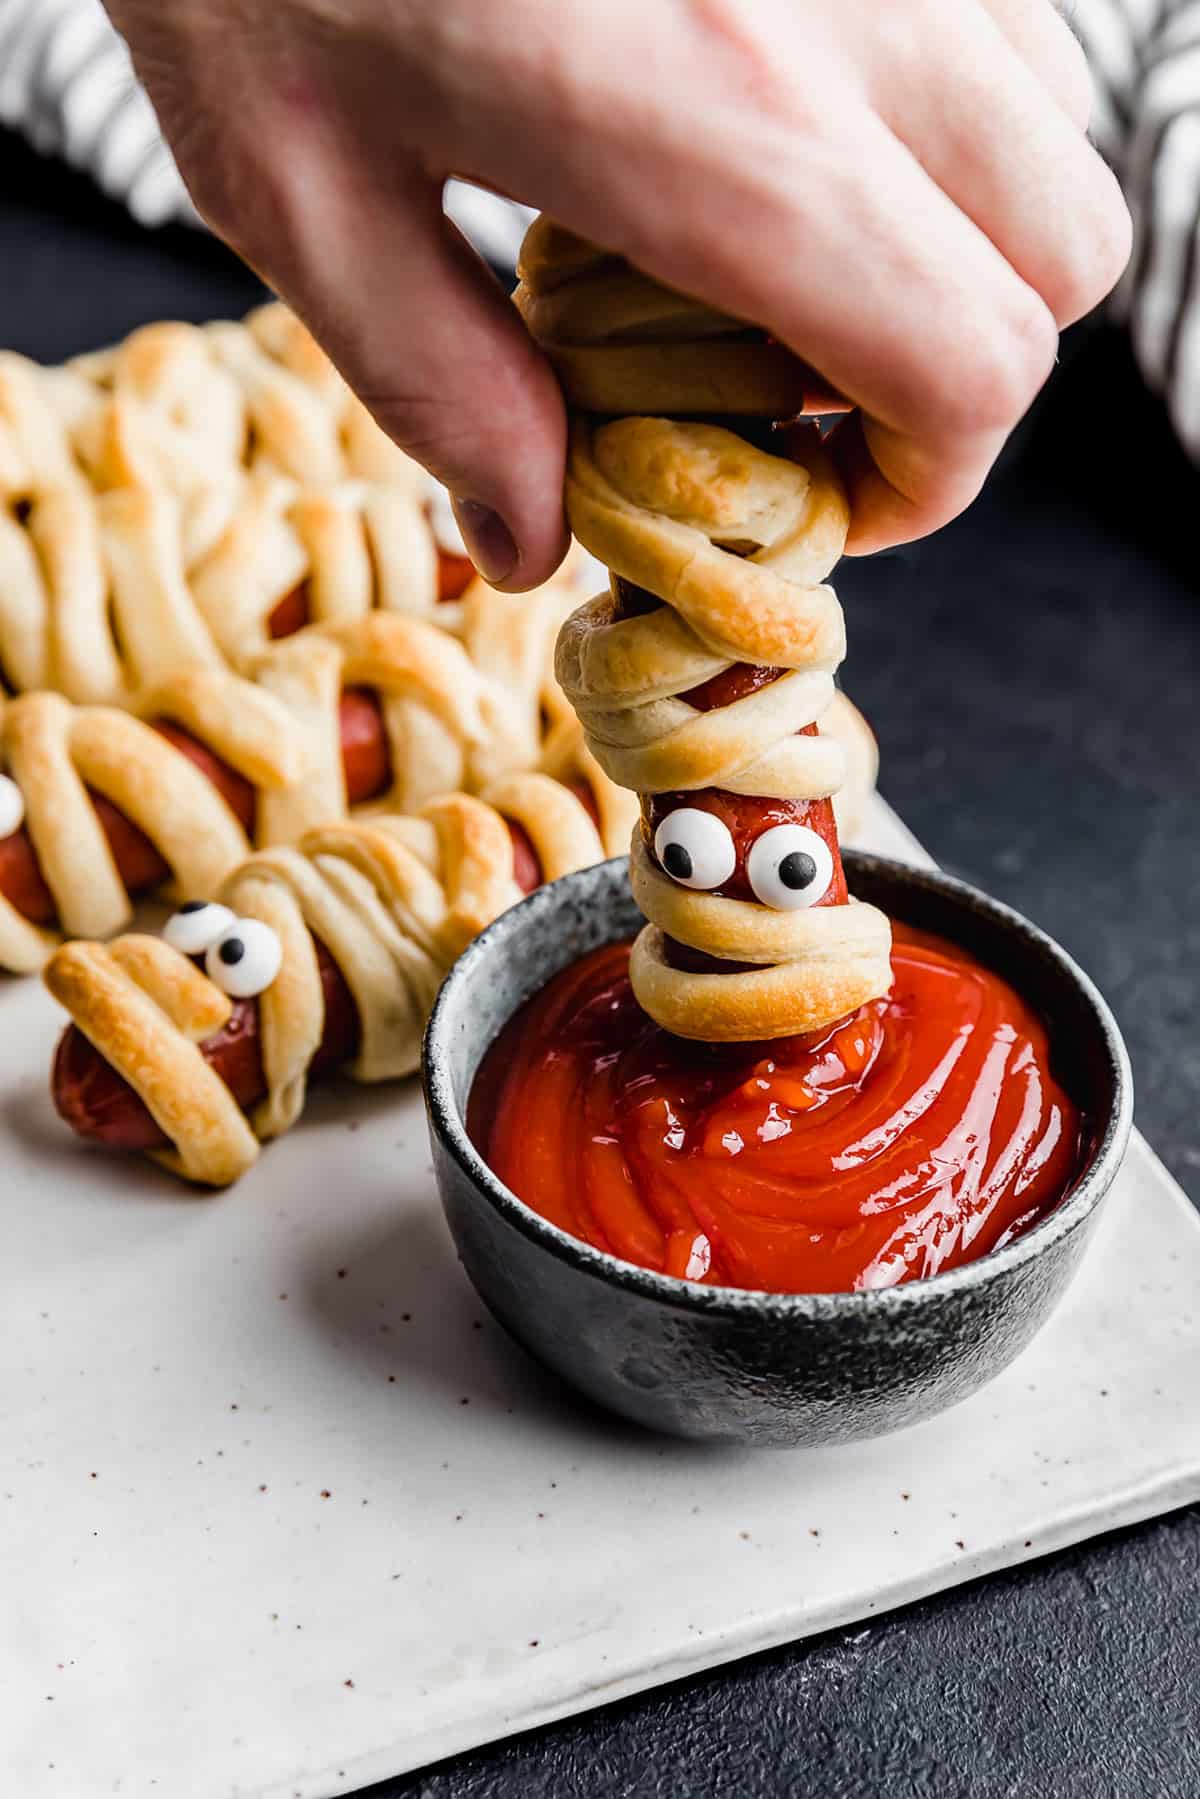 A hand dipping a Mummy Hot Dog into a bowl of ketchup.